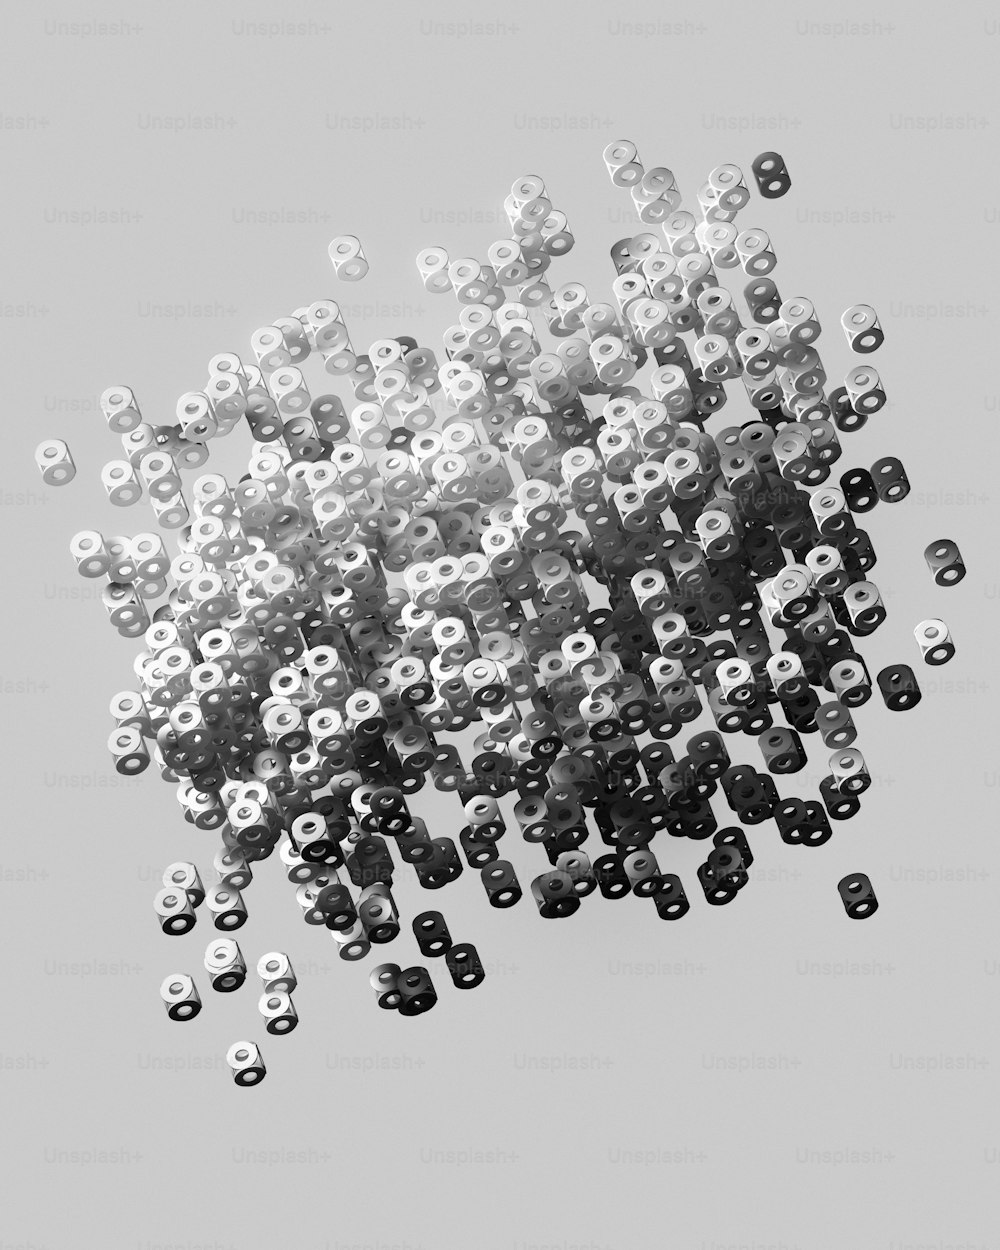 a bunch of small black and white objects floating in the air